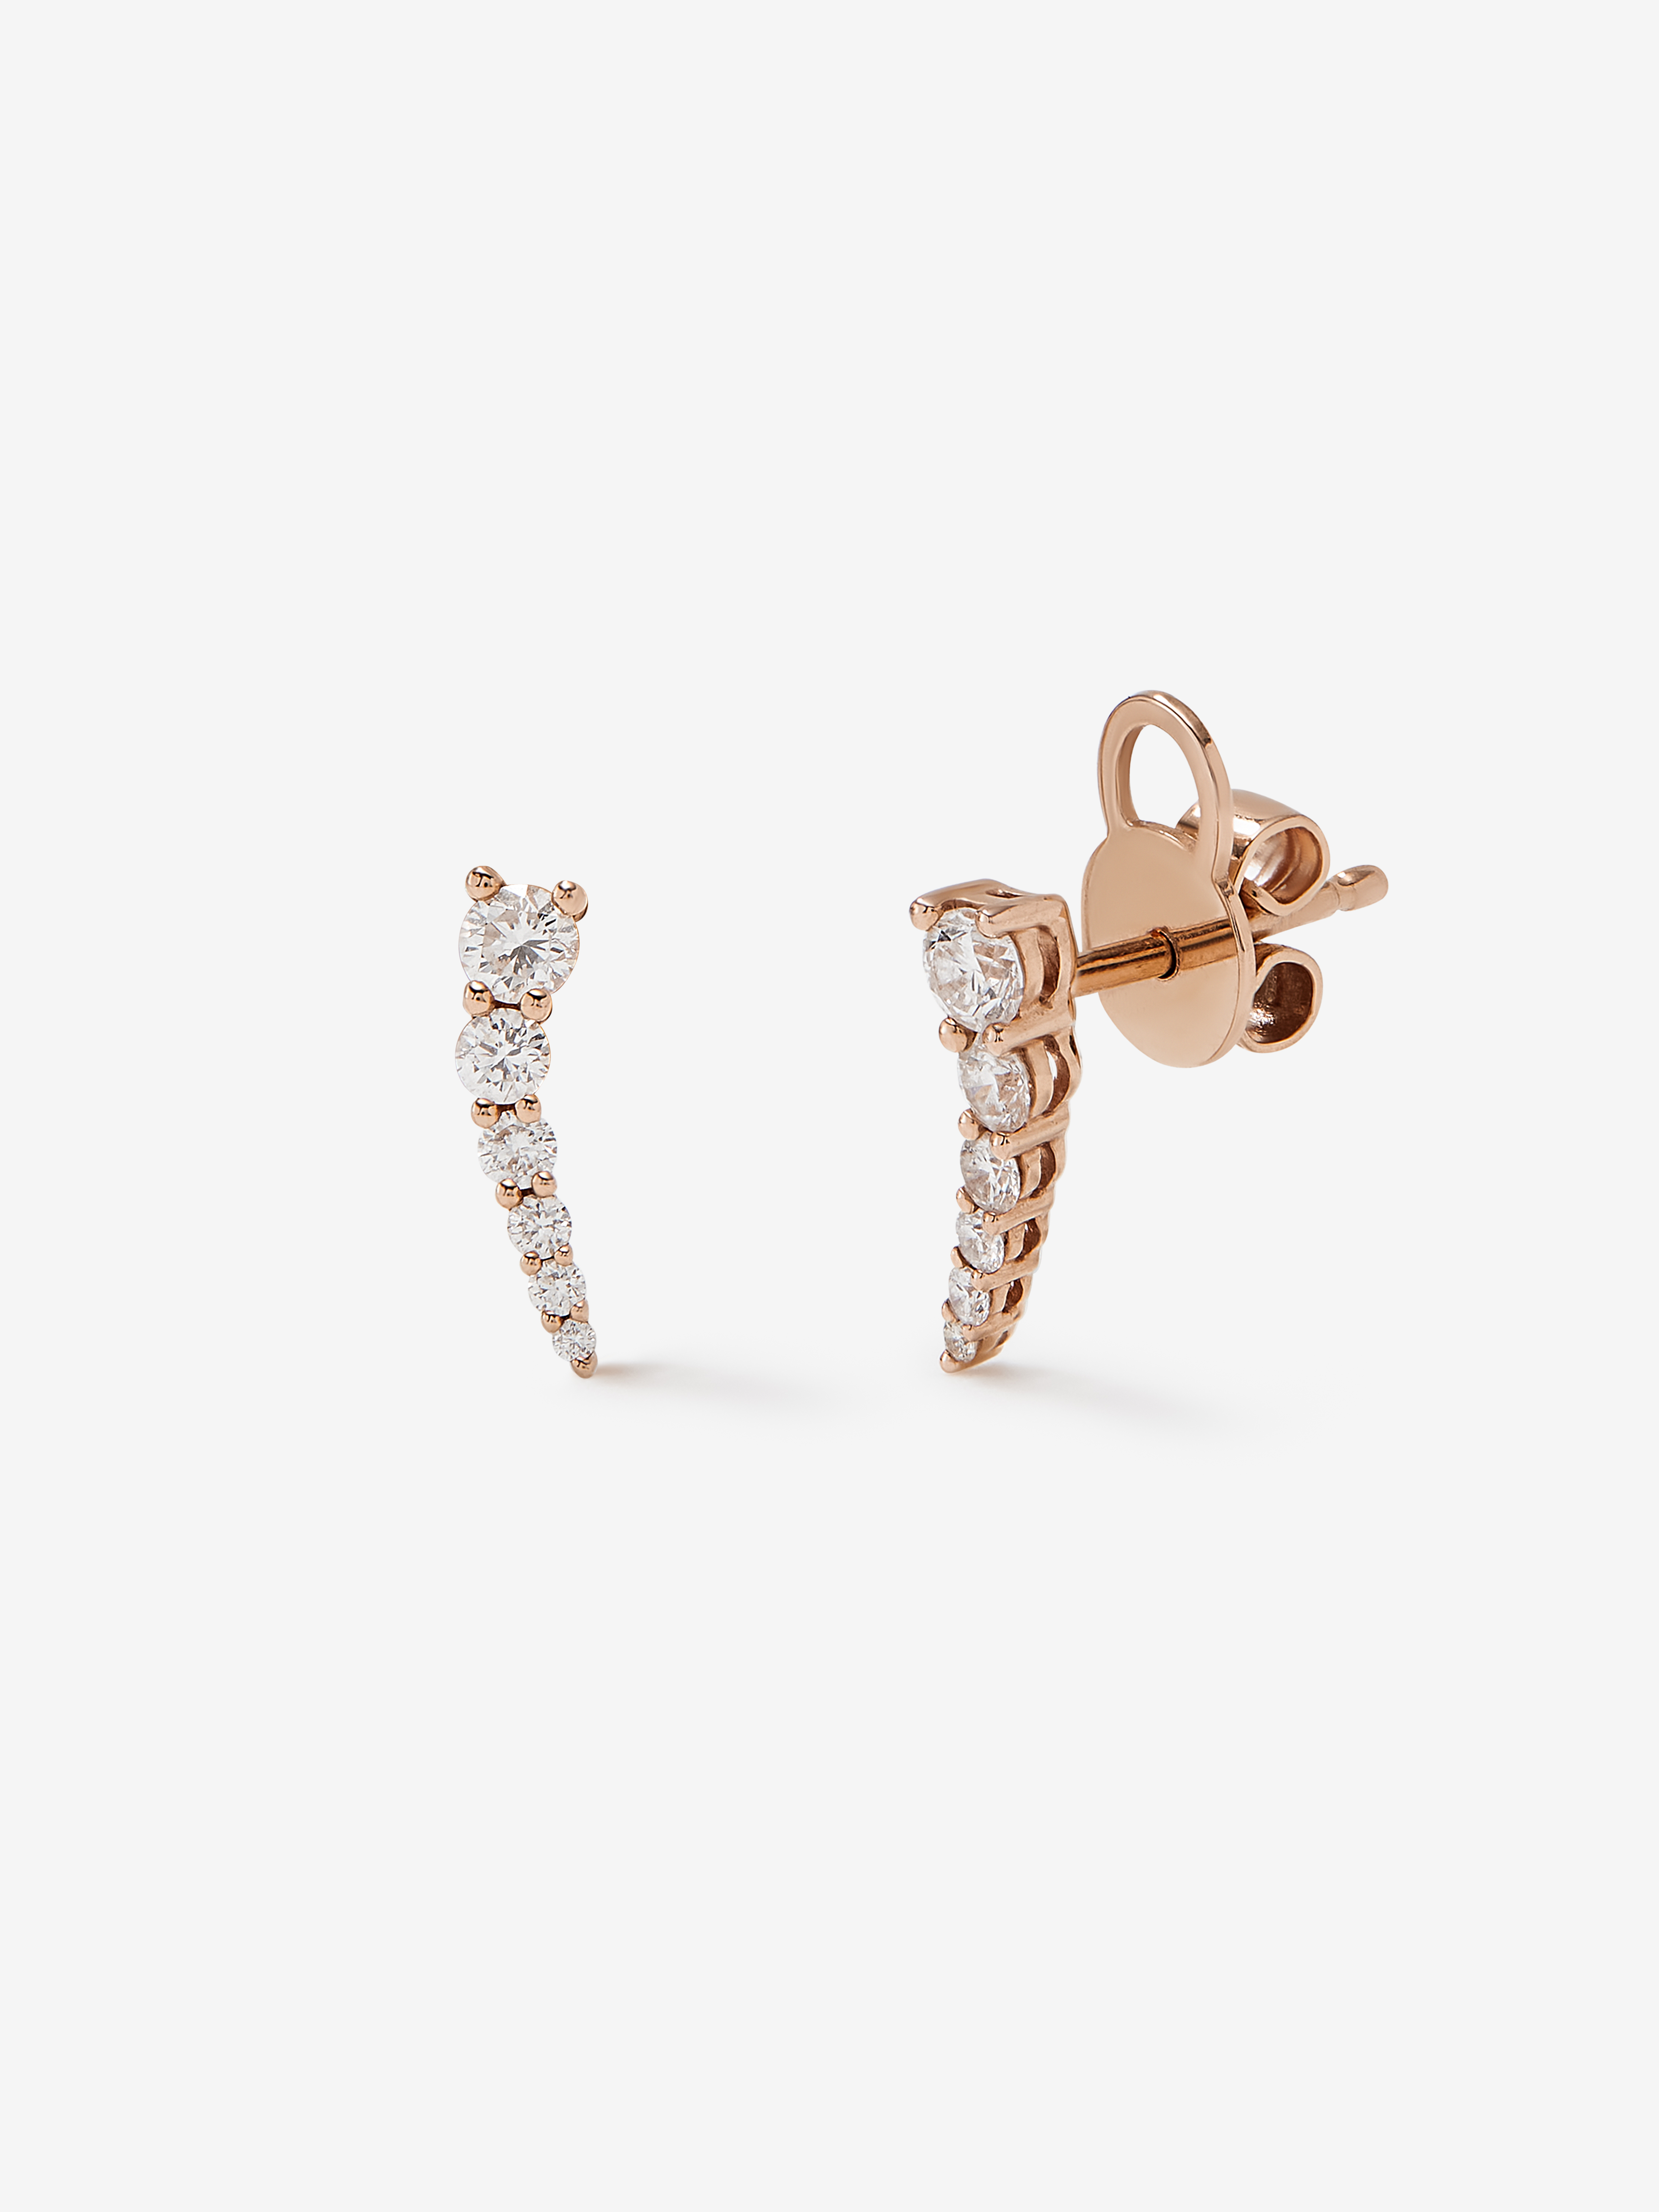 18K Rose Gold Climber Earrings with Diamonds